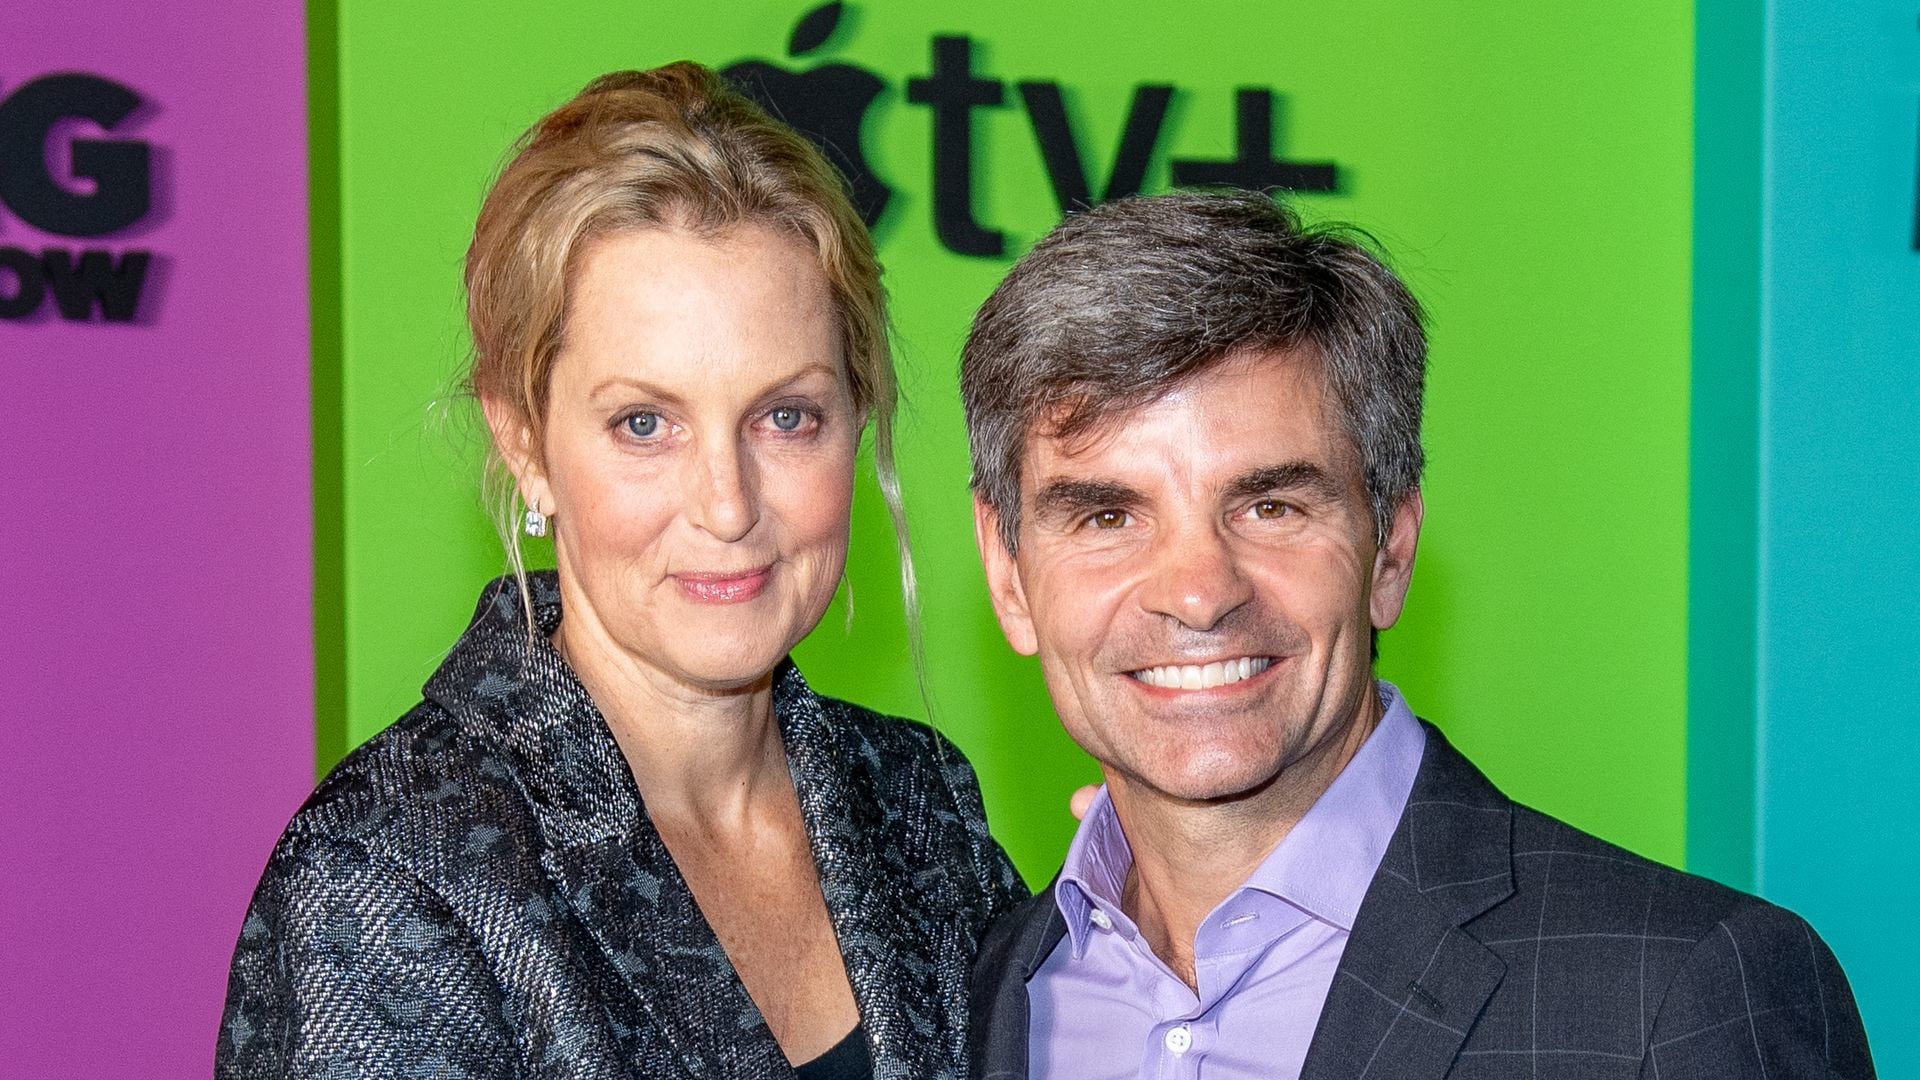 Ali Wentworth and George Stephanopoulos attend Apple TV+'s "The Morning Show" world premiere at David Geffen Hall on October 28, 2019 in New York City.